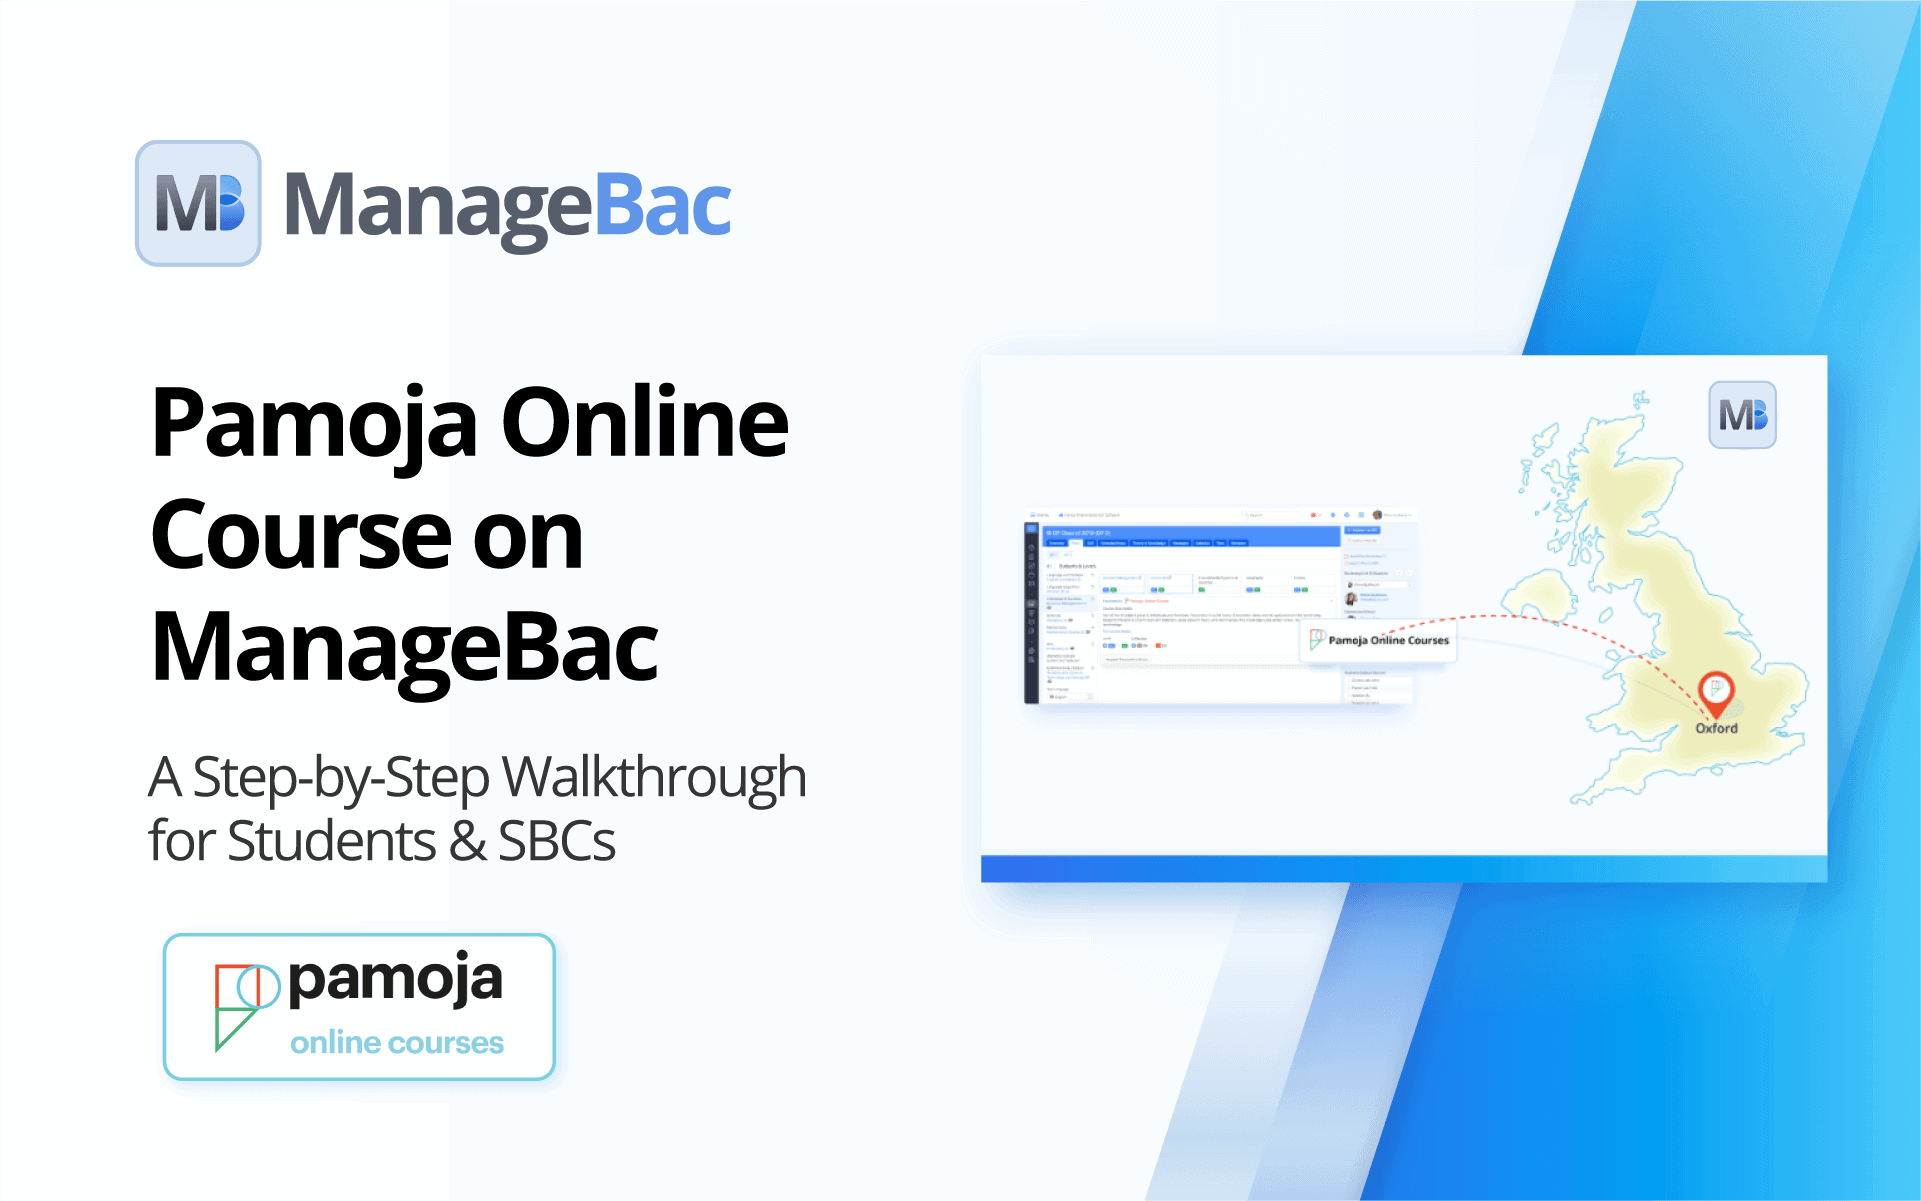 Pamoja Online Courses on ManageBac: A Step-by-Step Walkthrough for Students & SBCs